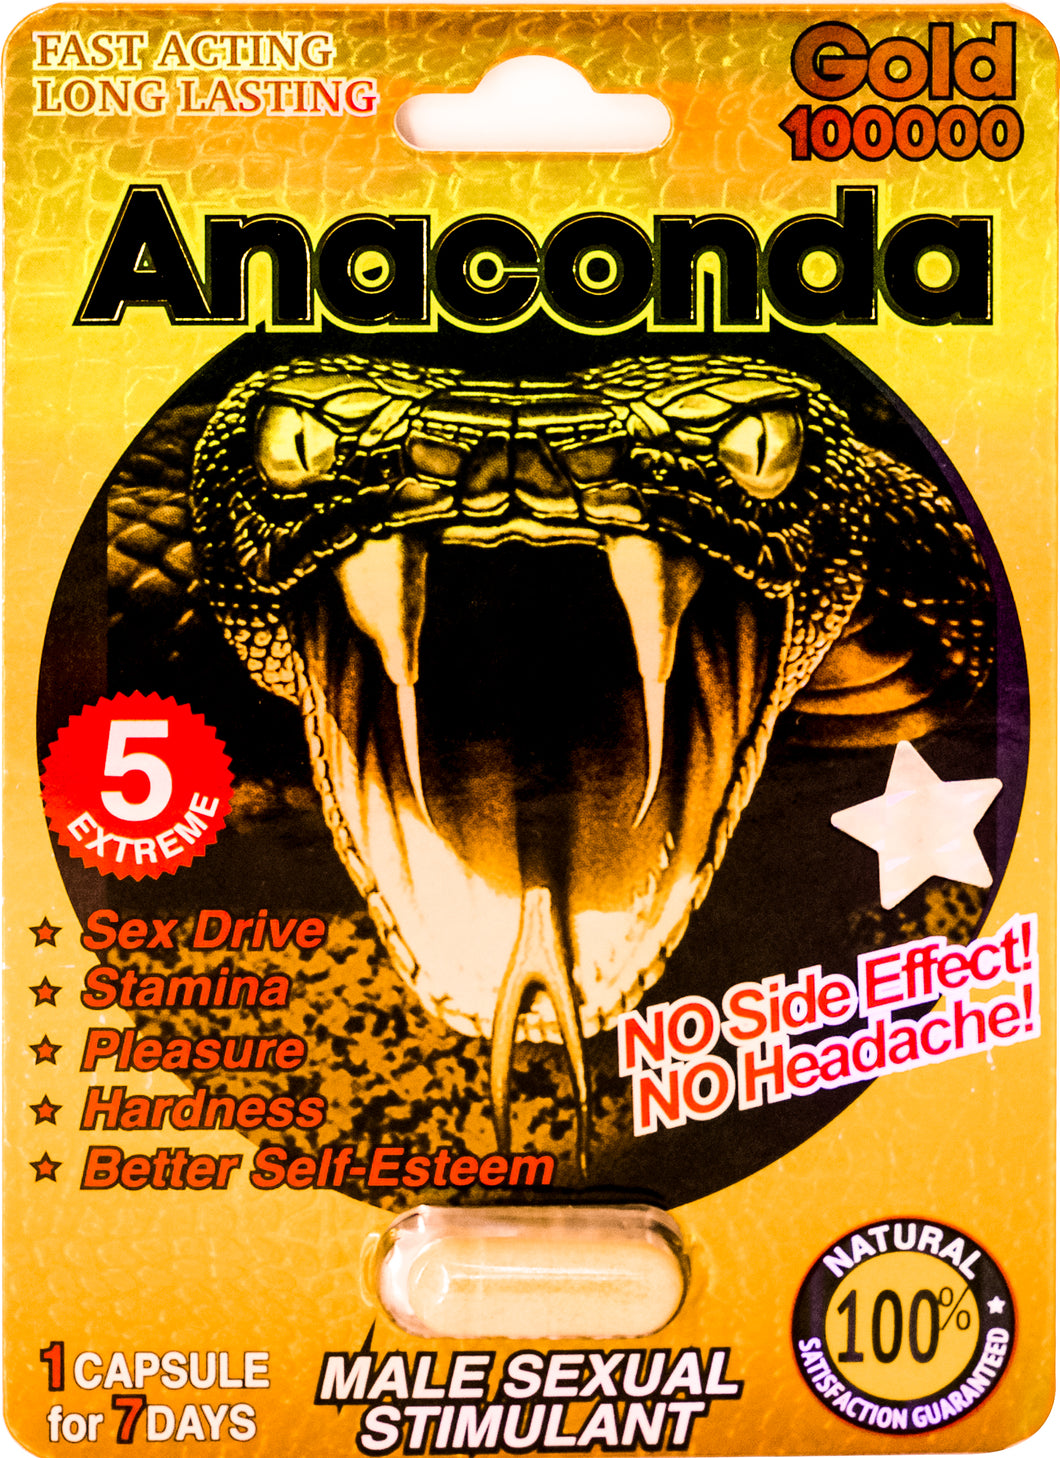 Anacnda Gold 100000 / Fast Acting Amplifier for Strength, Performance, Energy, and Endurance, Extra Strength